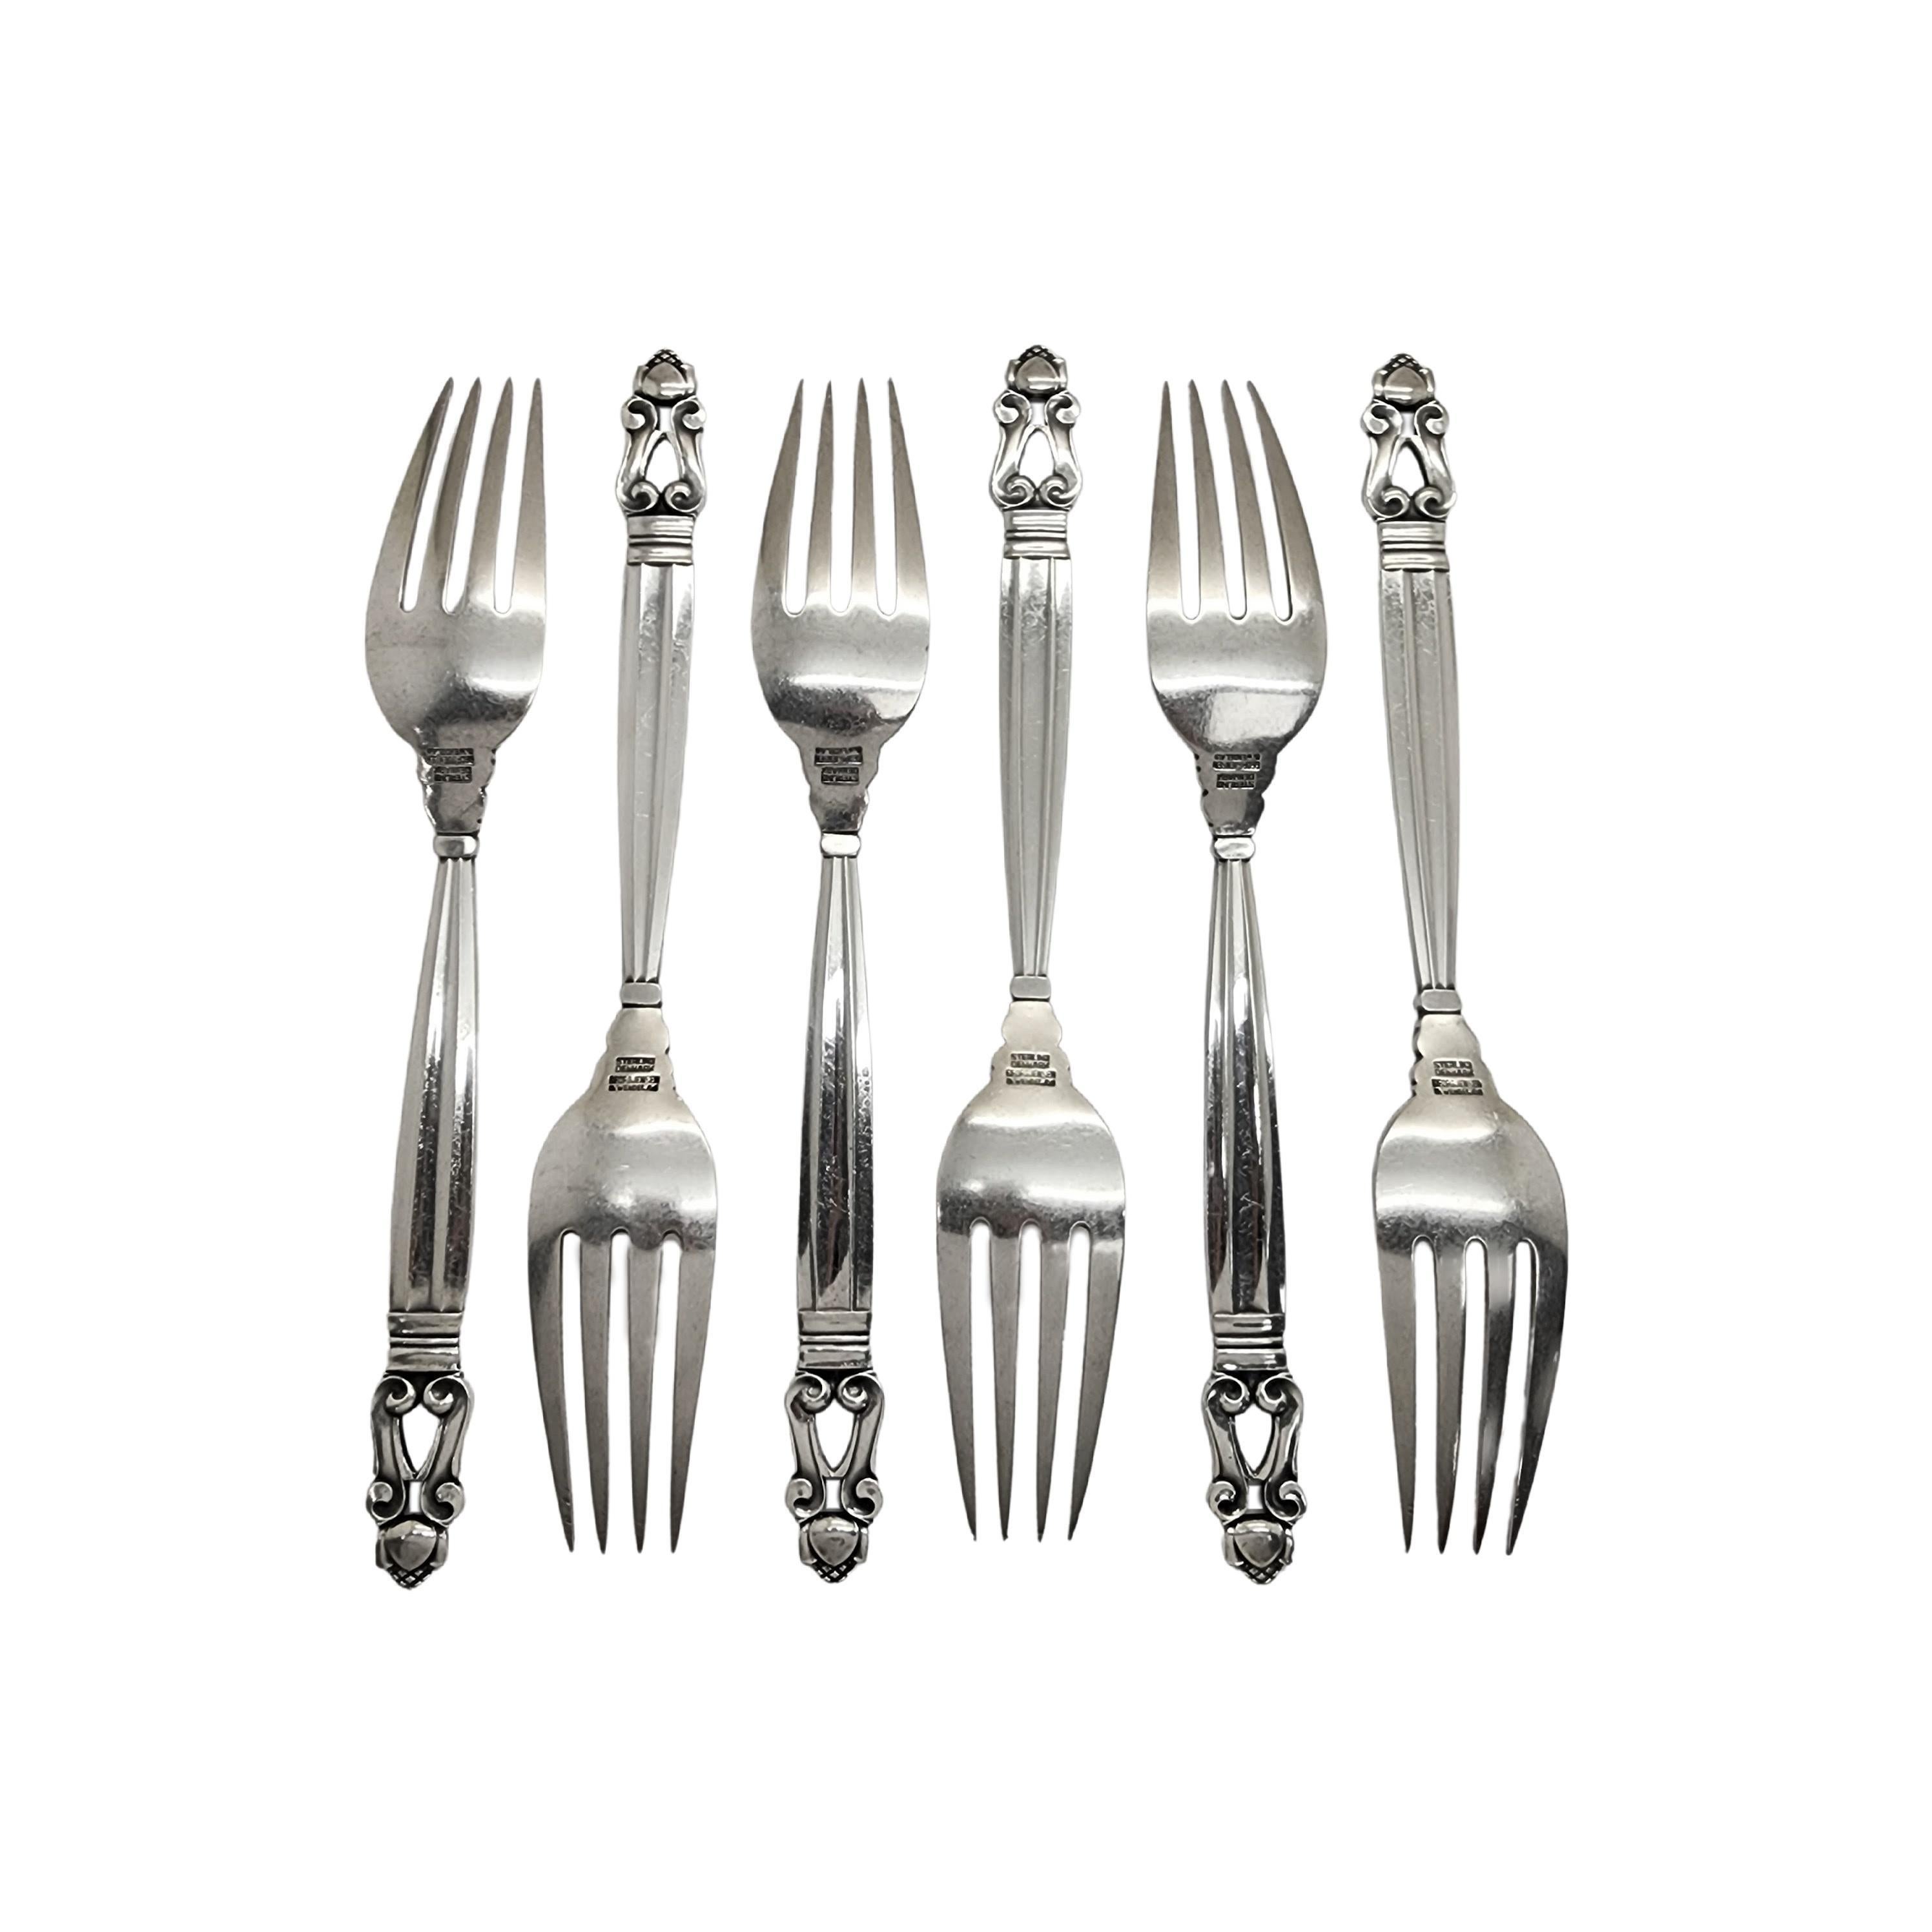 Set of 6 sterling silver dinner forks in the Acorn pattern by Georg Jensen.

The Acorn pattern was introduced in 1915 as a collaboration between Georg Jensen and designer Johan Ronde. The Acorn pattern, which combines Art Nouveau and Art Deco